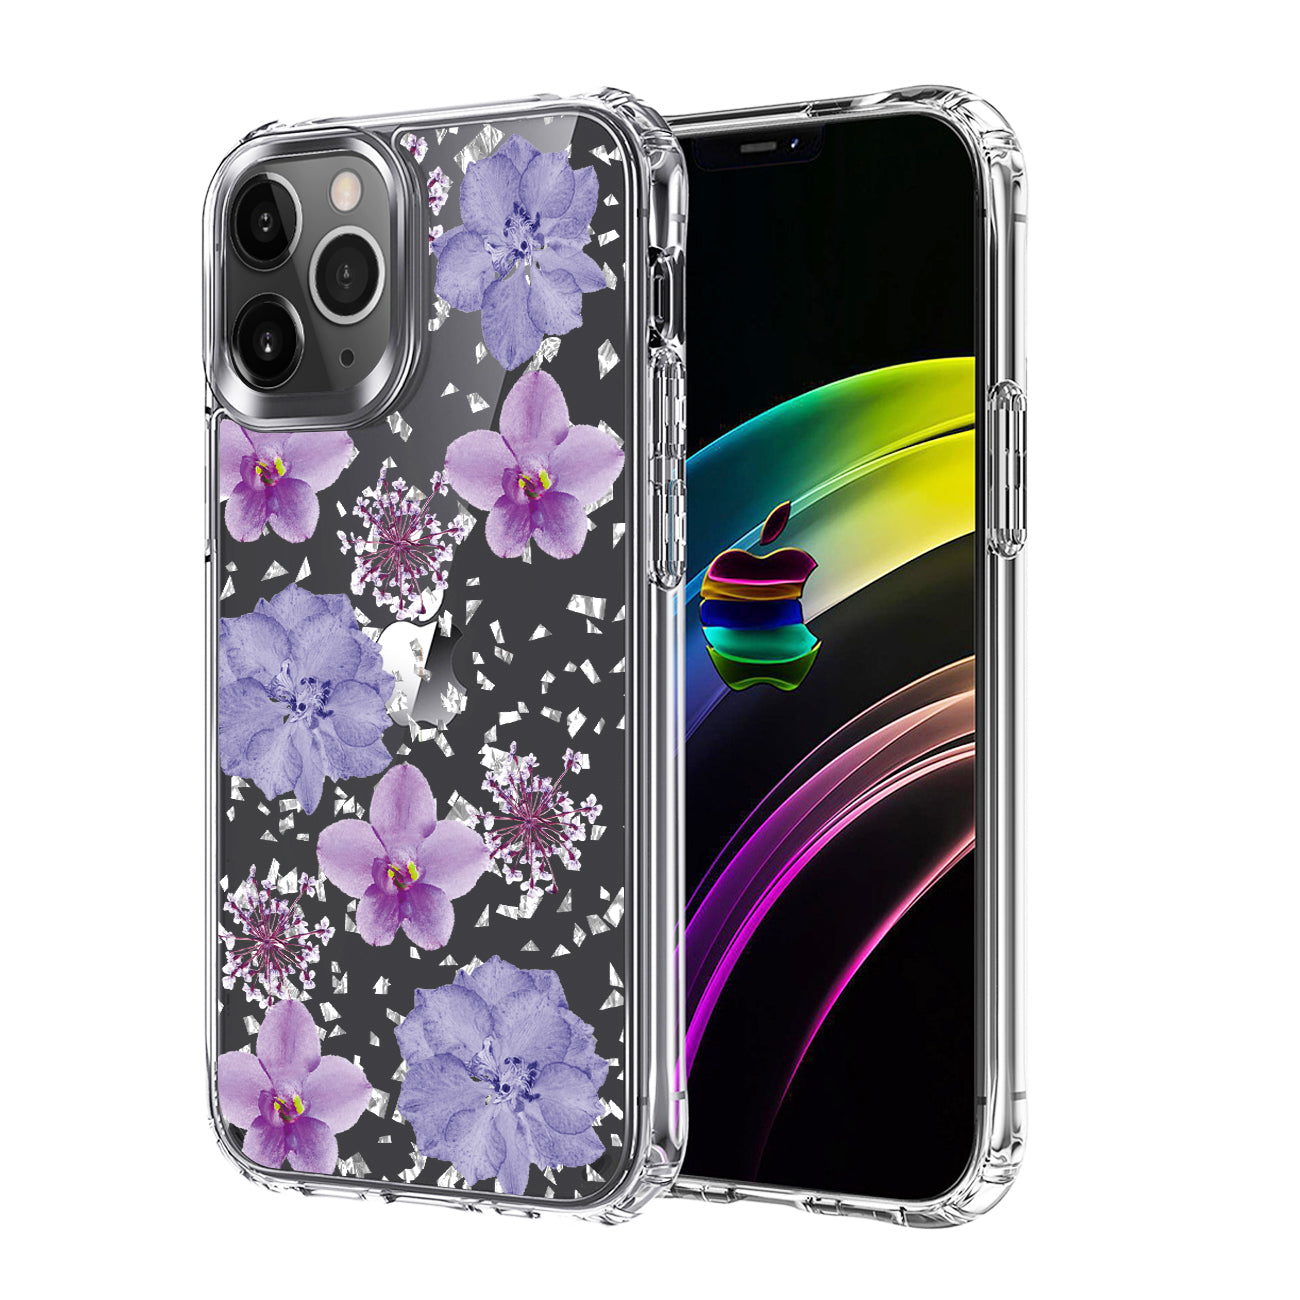 Pressed dried flower Design Phone case for APPLE IPHONE 11 in Purple